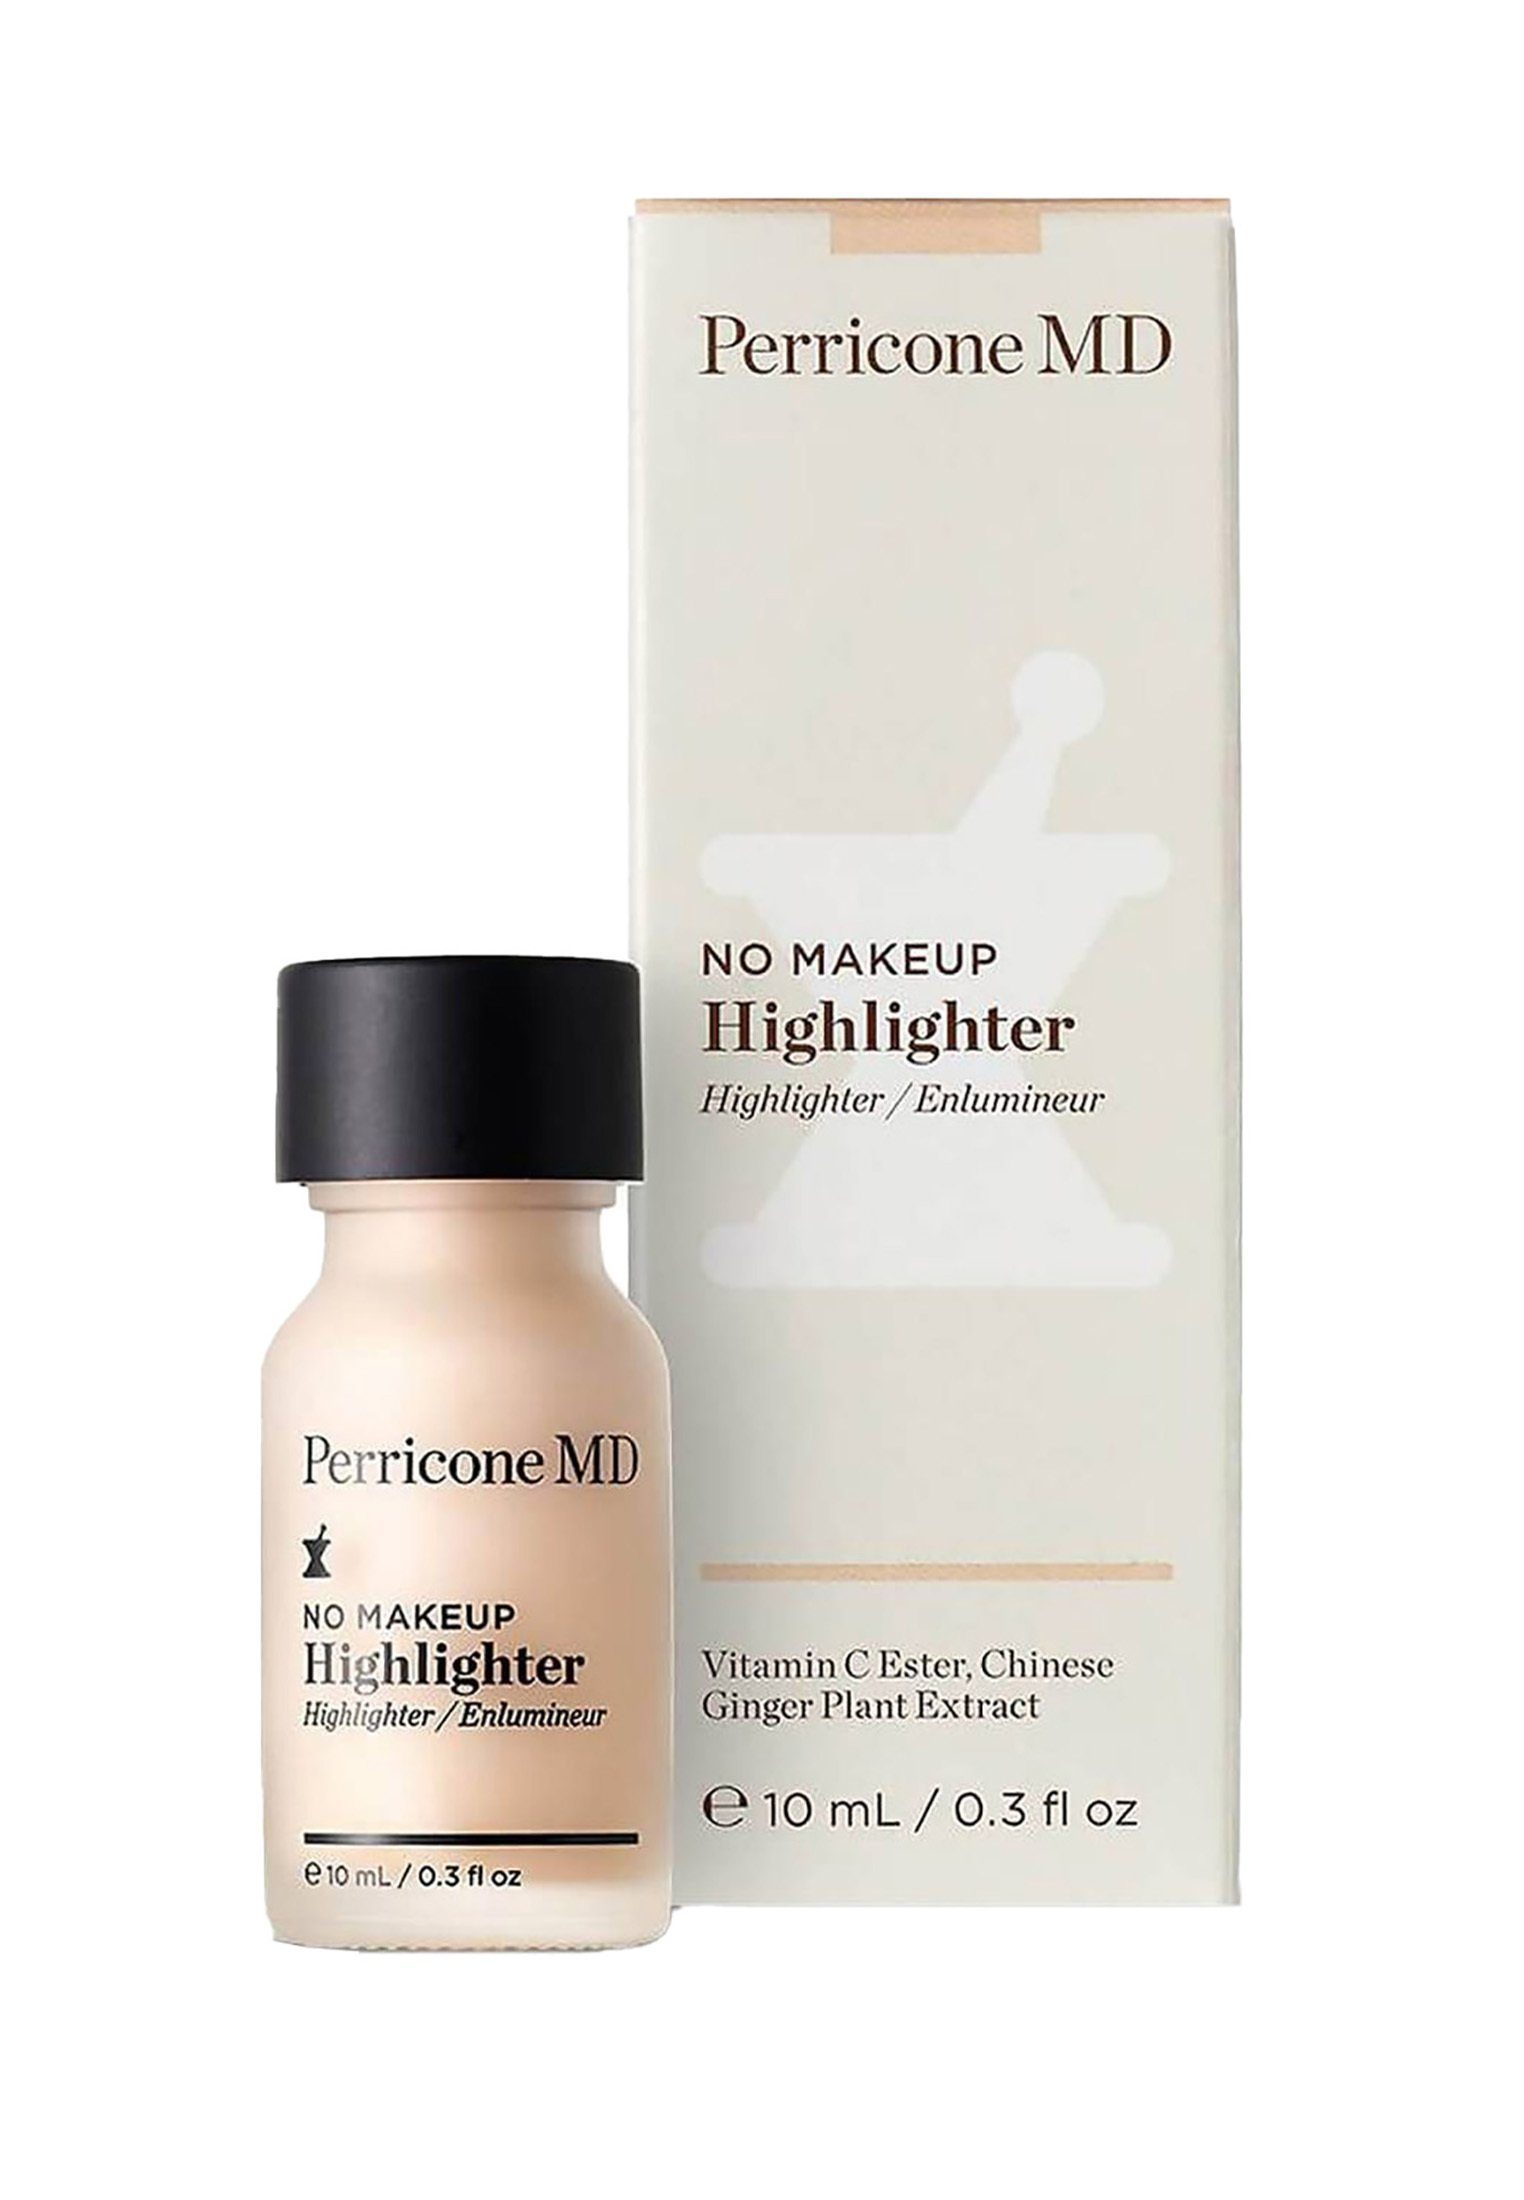 PERRICONE Highlighter PERRICONE Makeup No Highlighter Highlighter